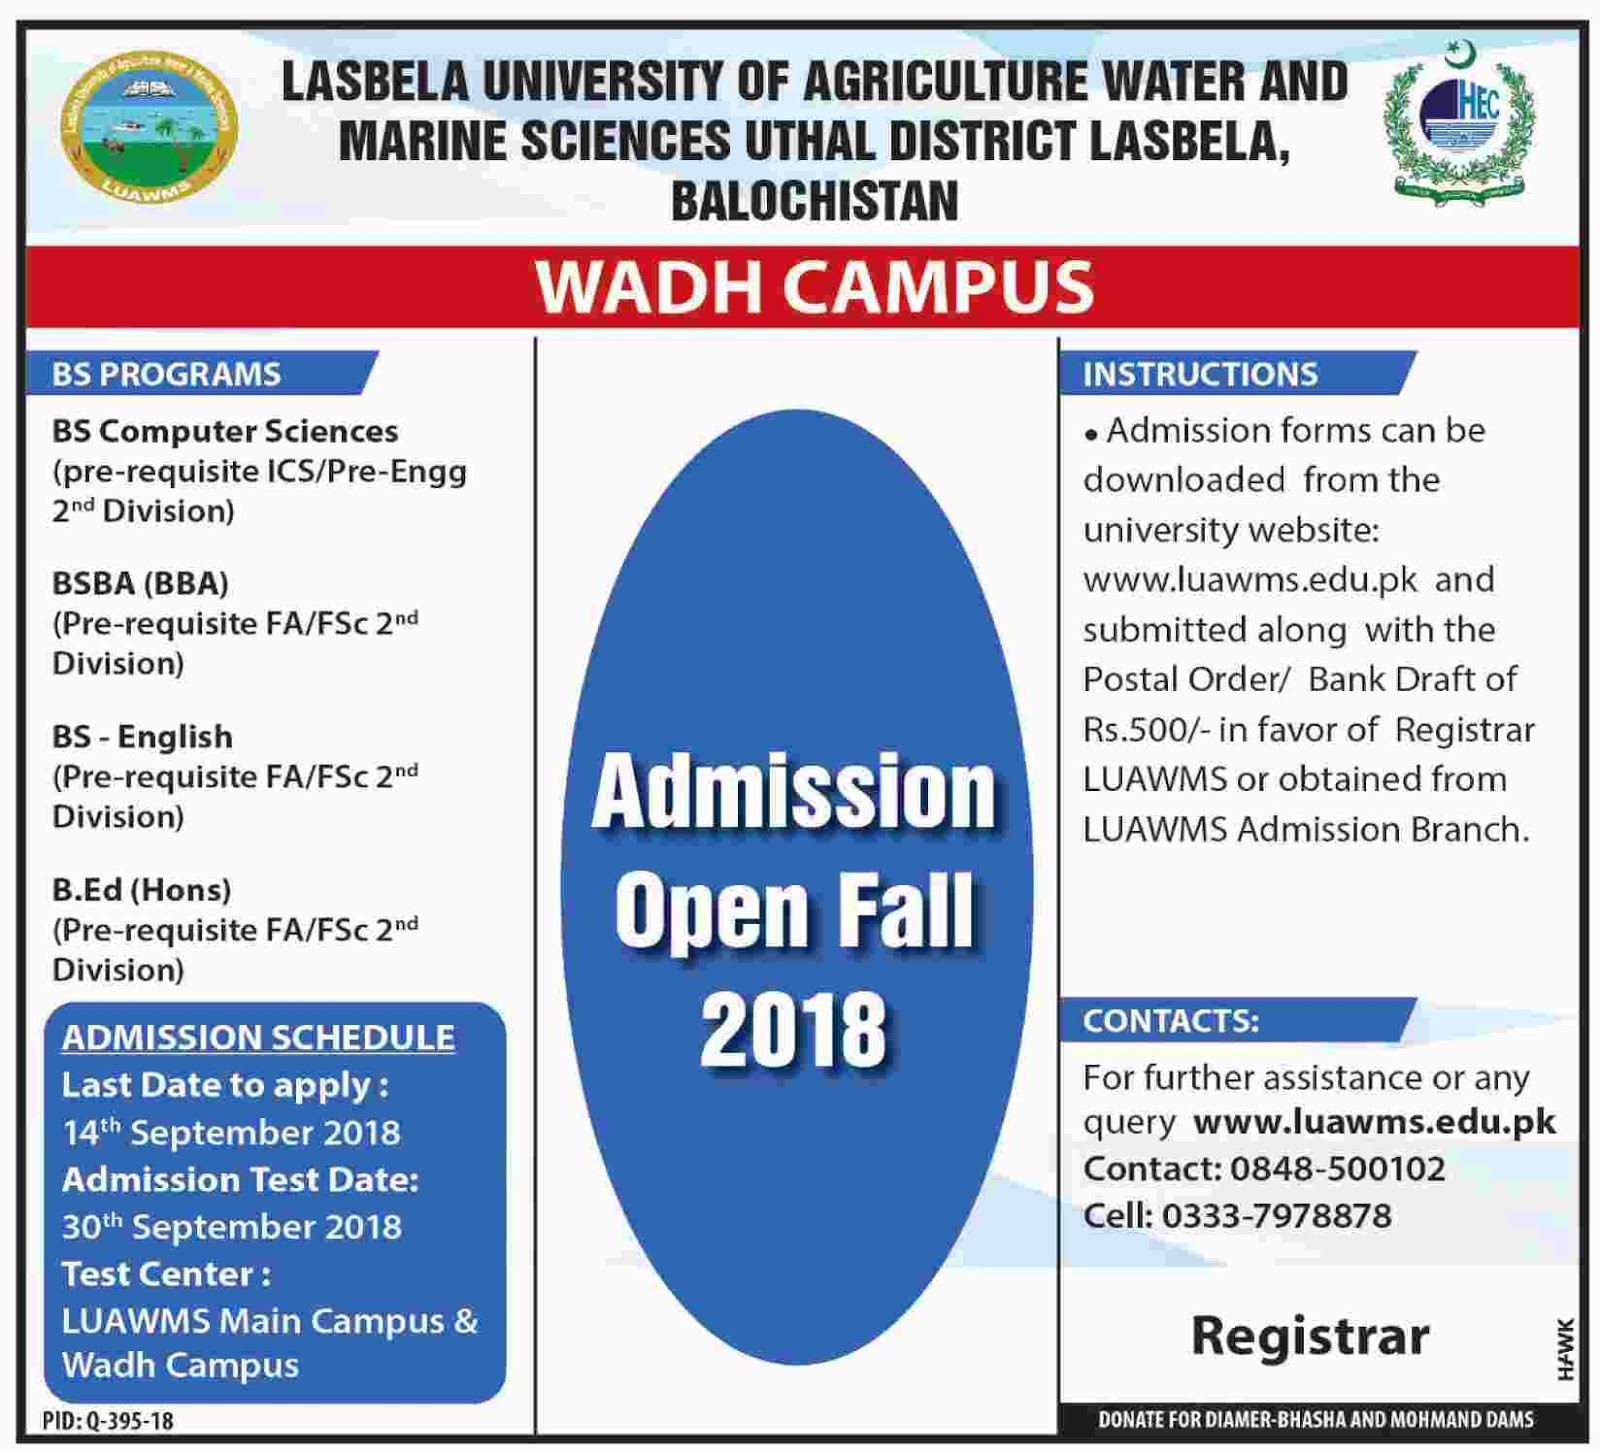 Admissions Open For Fall 2018 At LUAWMS Lasbela, Khuzdar and Dera Murad Jamali Campus